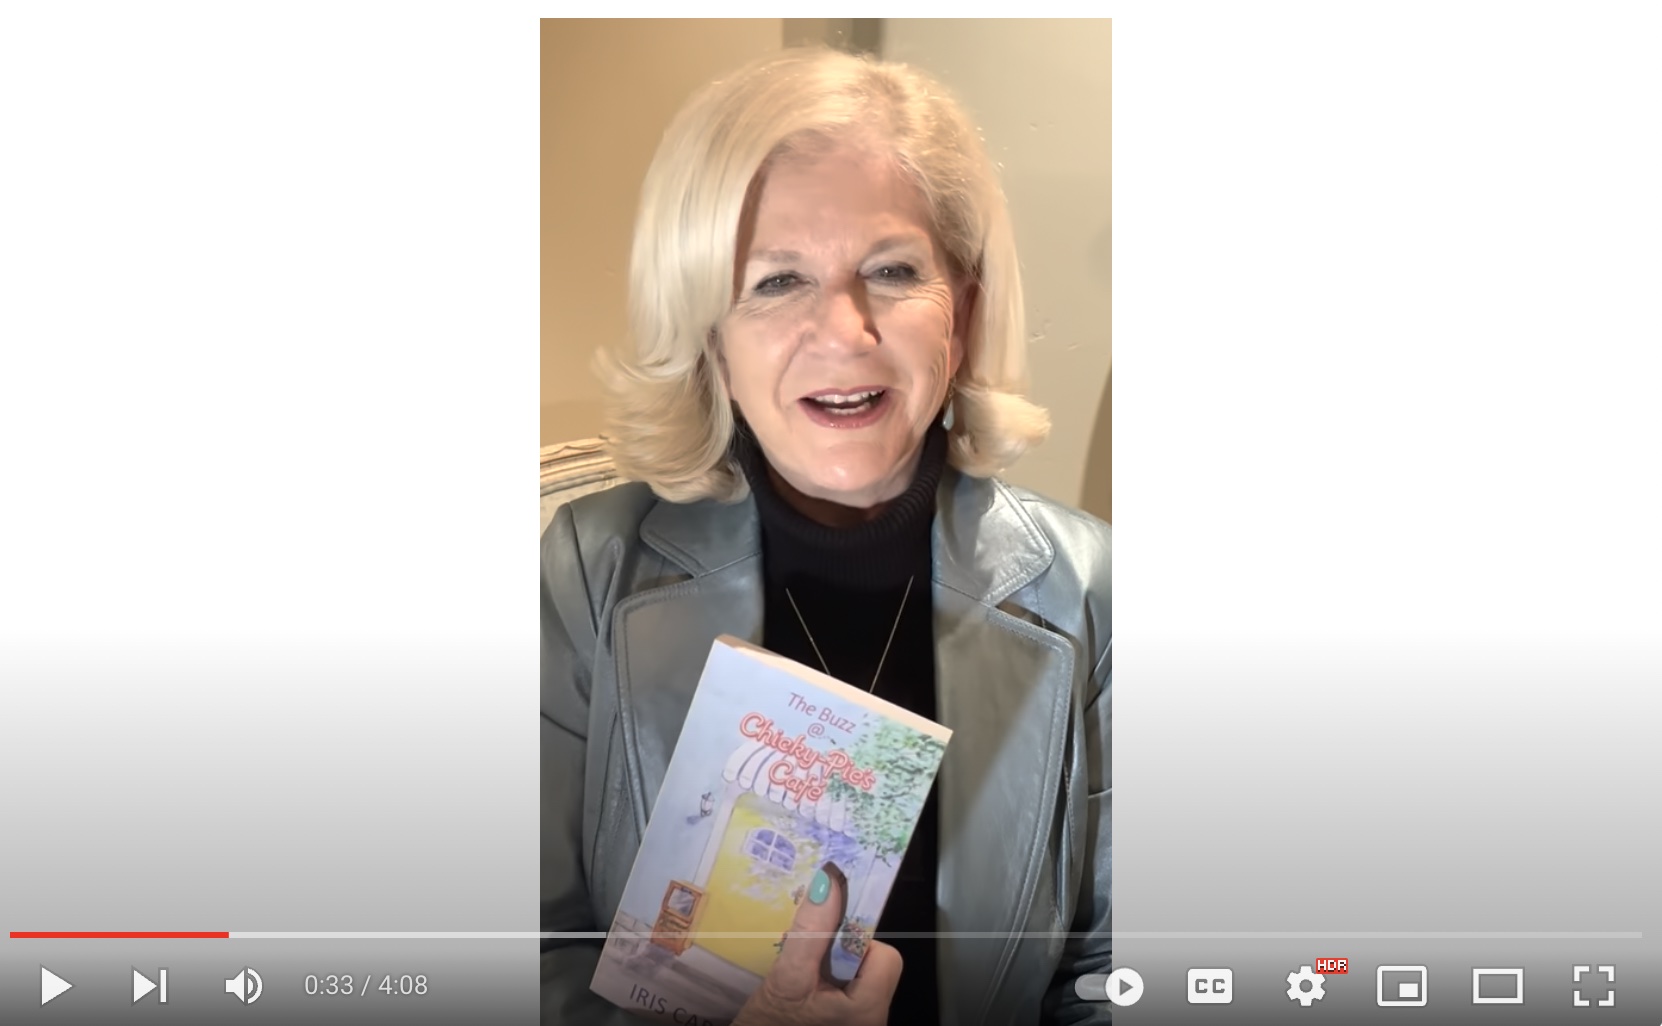 Image of Iris Carignan video on youtube. Iris is holding her book in the video.